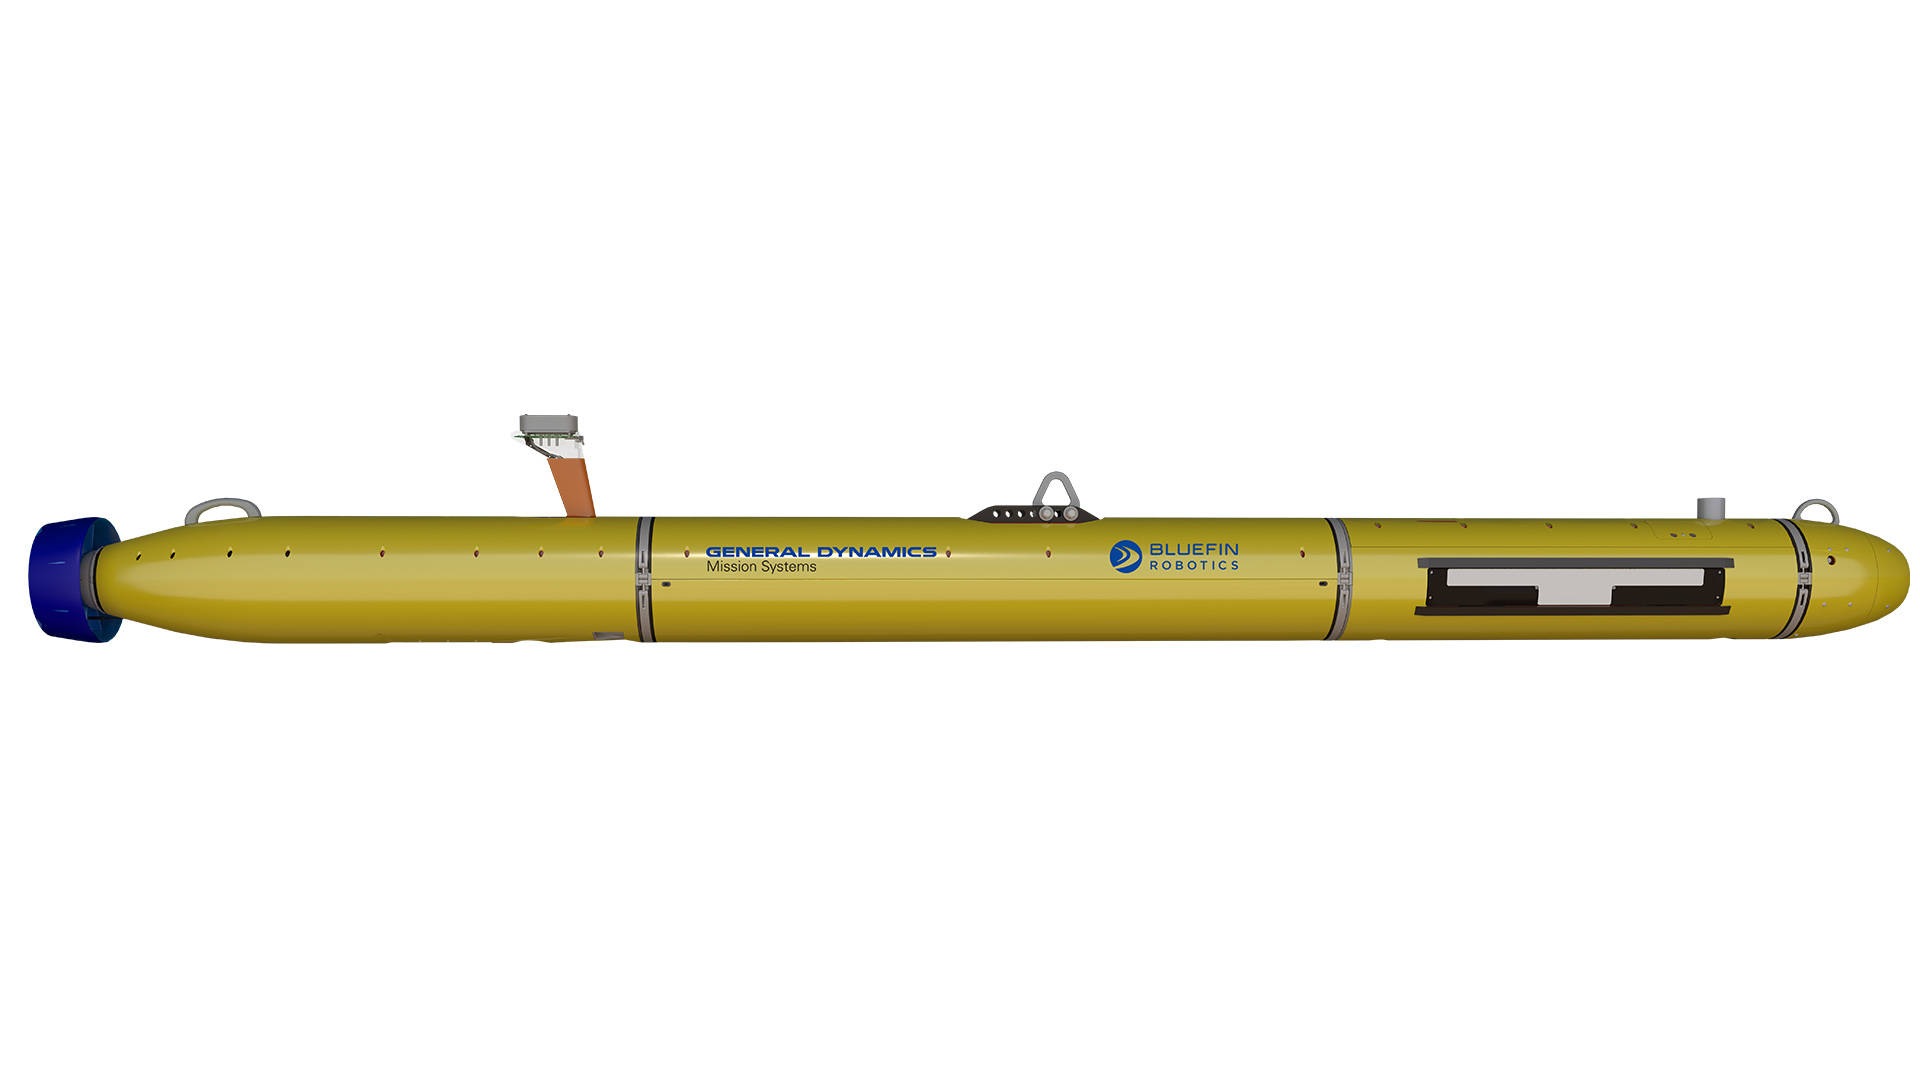 Bluefin-12 UUV Product Cut Out Grid